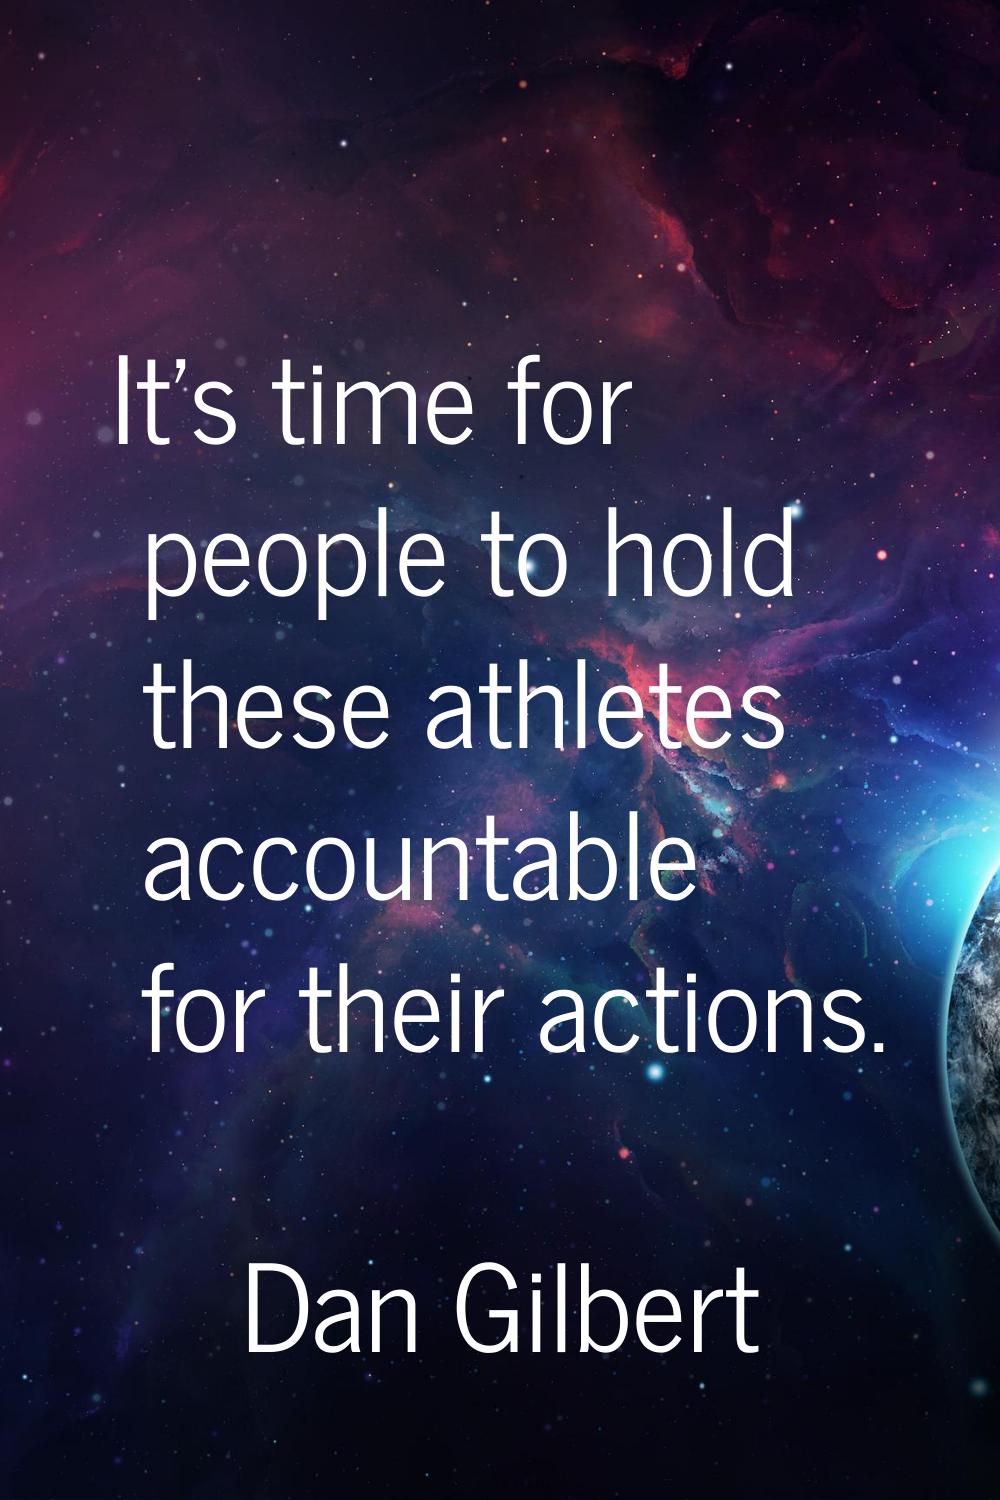 It's time for people to hold these athletes accountable for their actions.